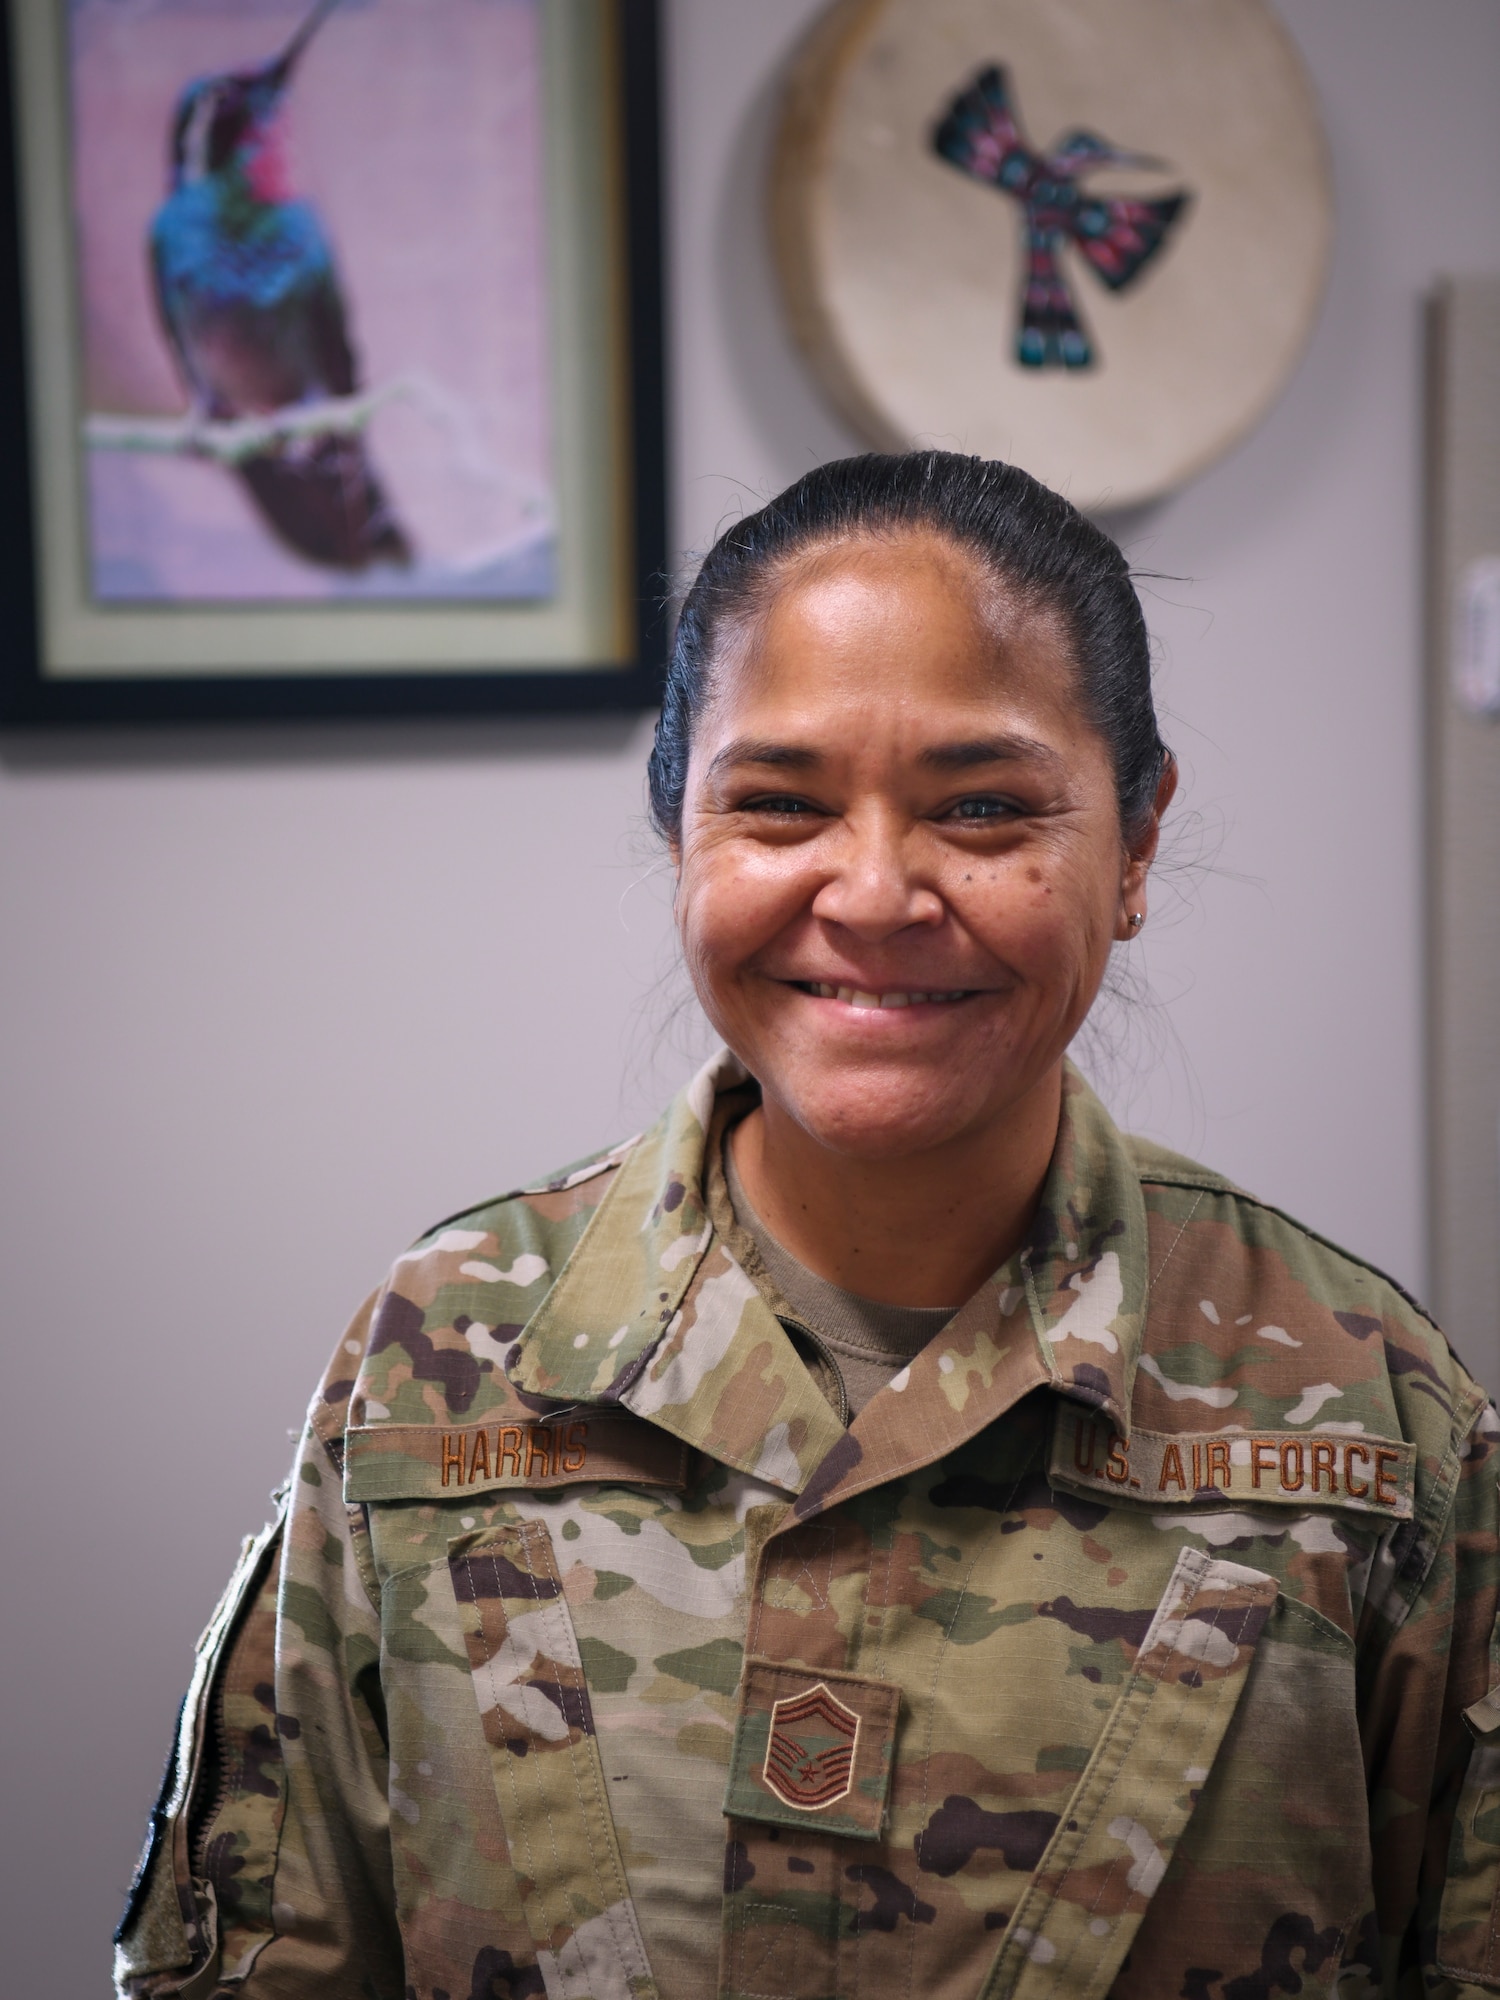 A female airman stand in front of items representing her Native American heritage.